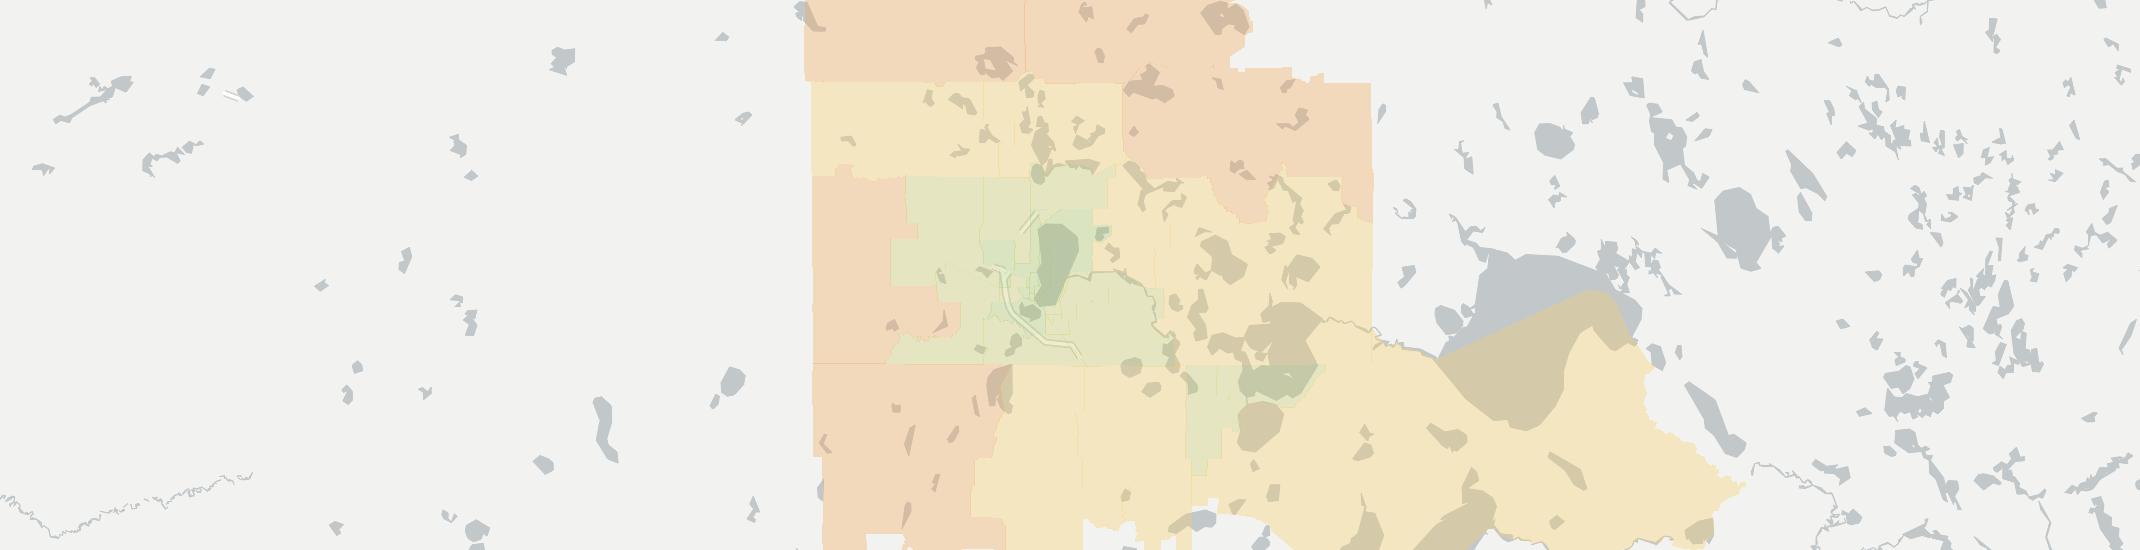 Bemidji Internet Competition Map. Click for interactive map.